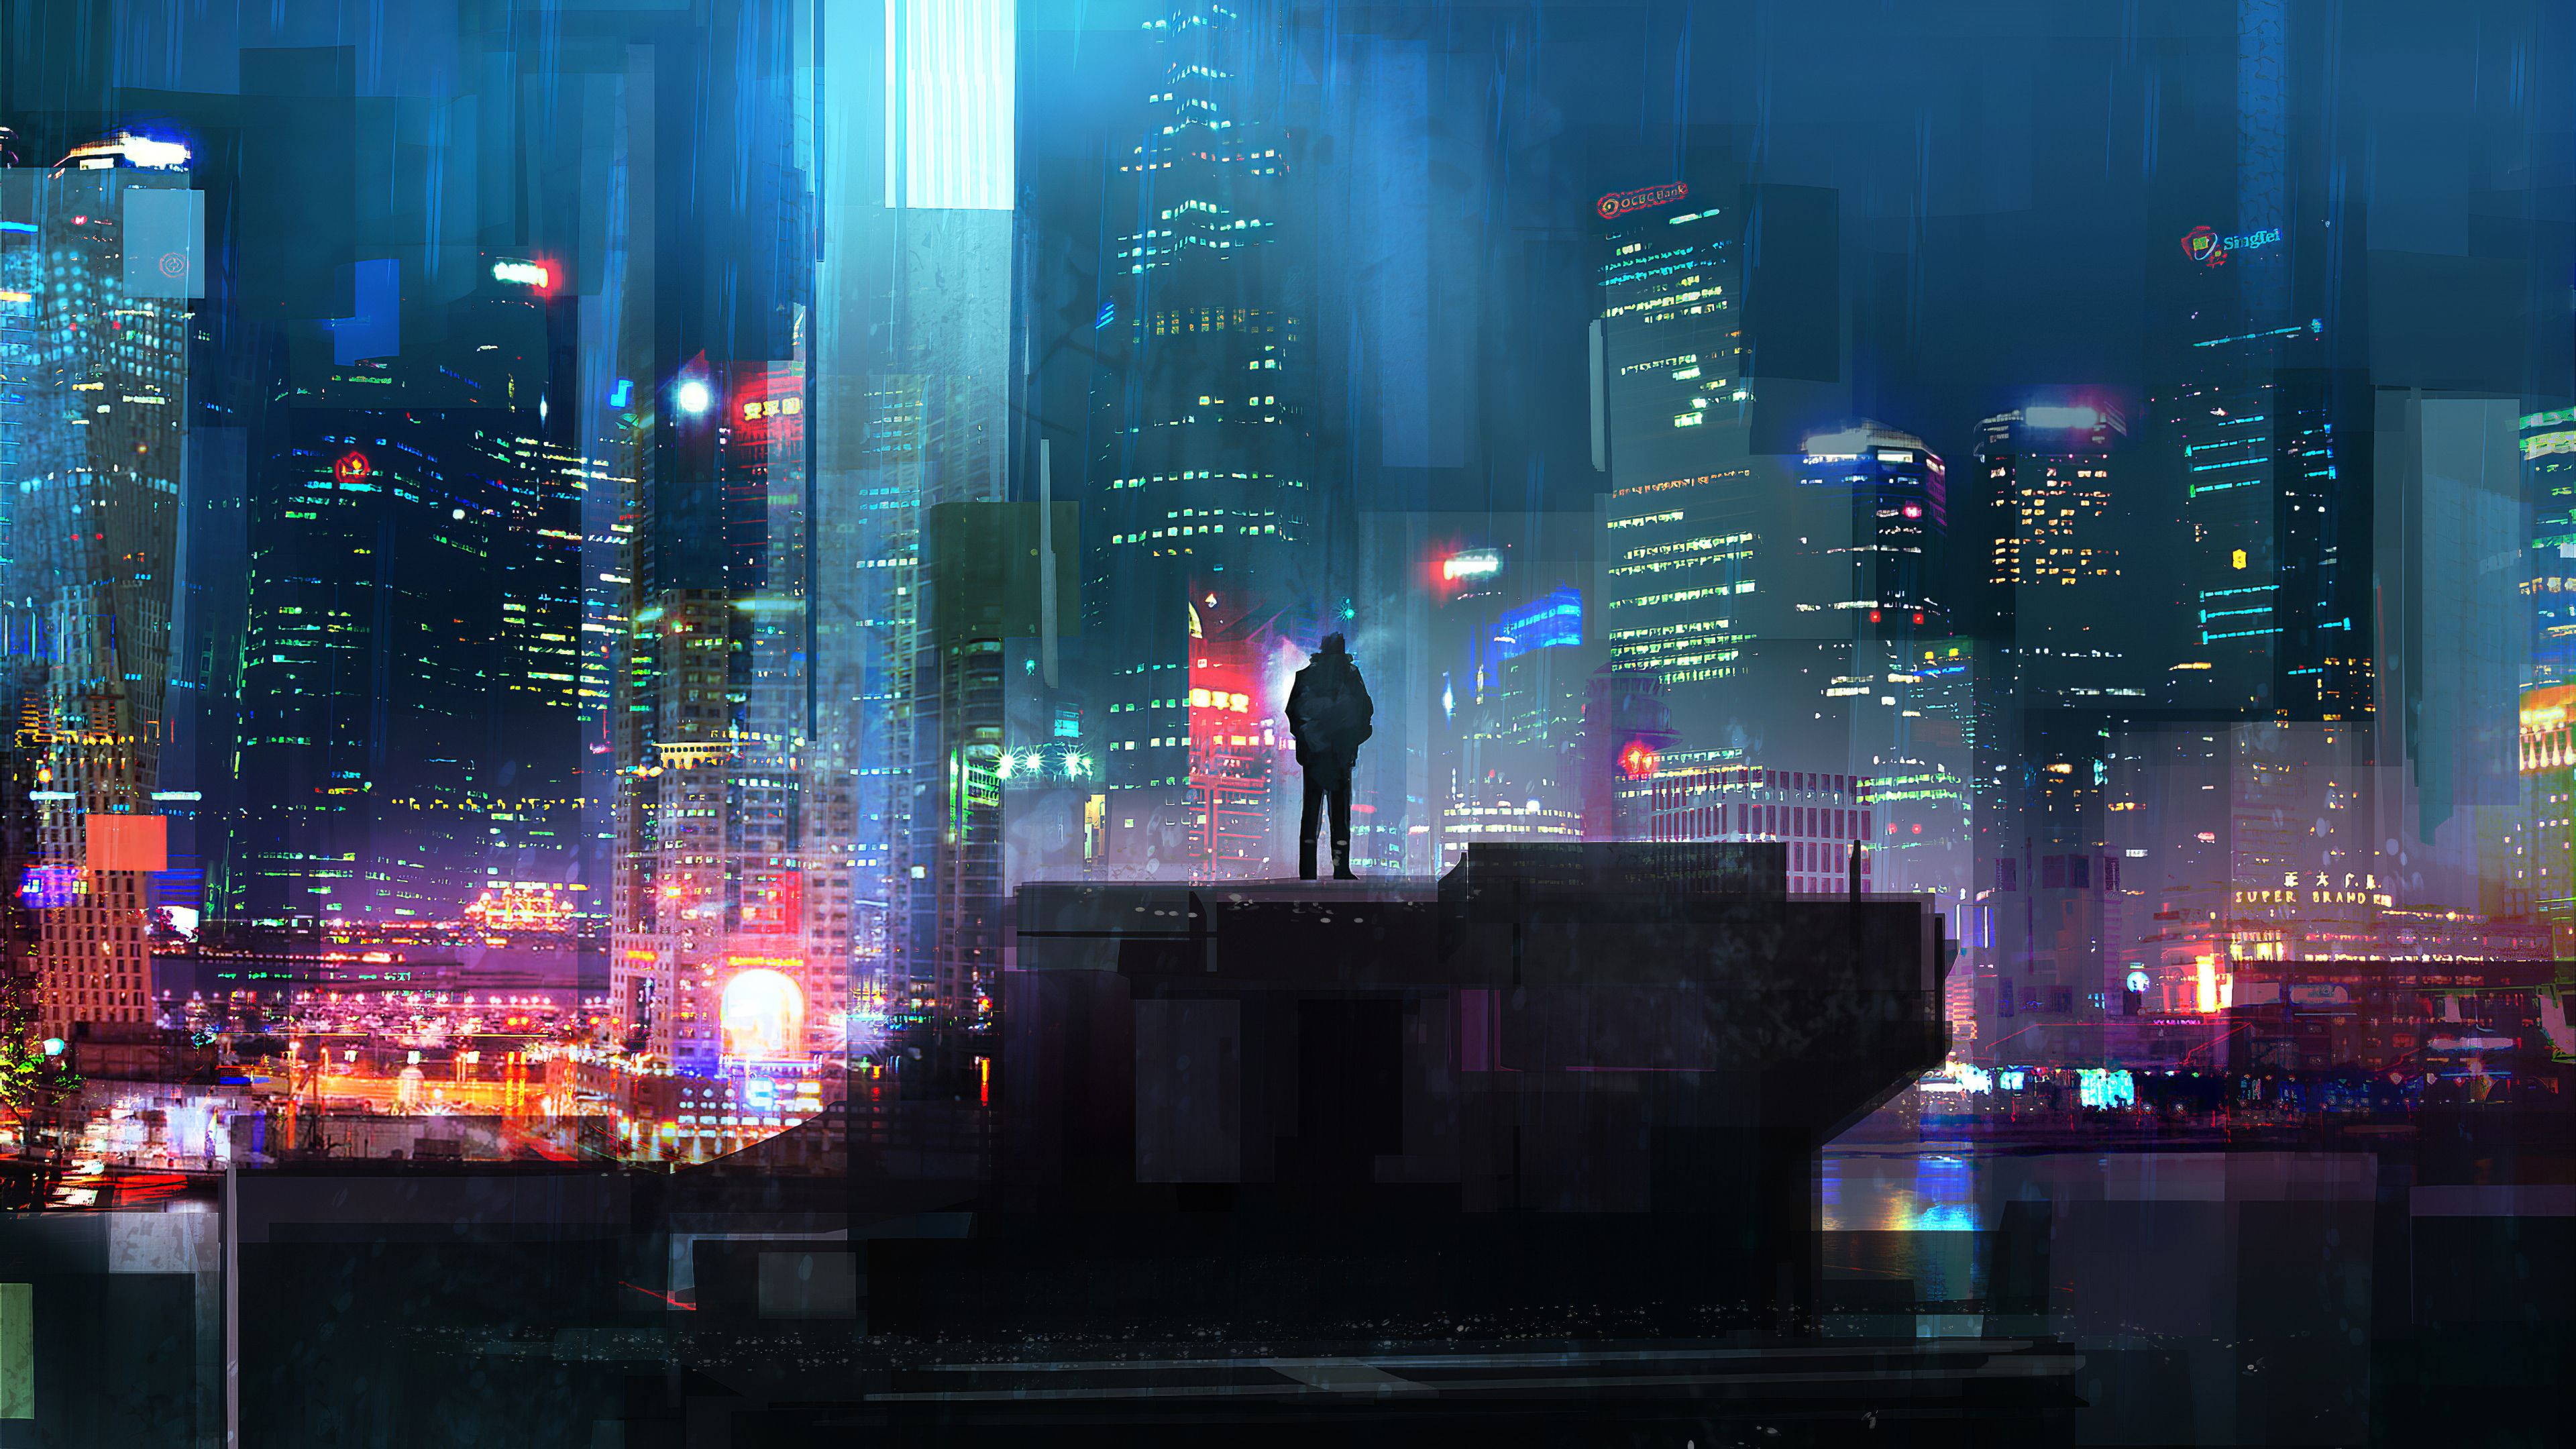 Cyberpunk City Concept Art 4k Wallpaper,HD Artist Wallpapers,4k Wallpapers ,Images,Backgrounds,Photos and Pictures